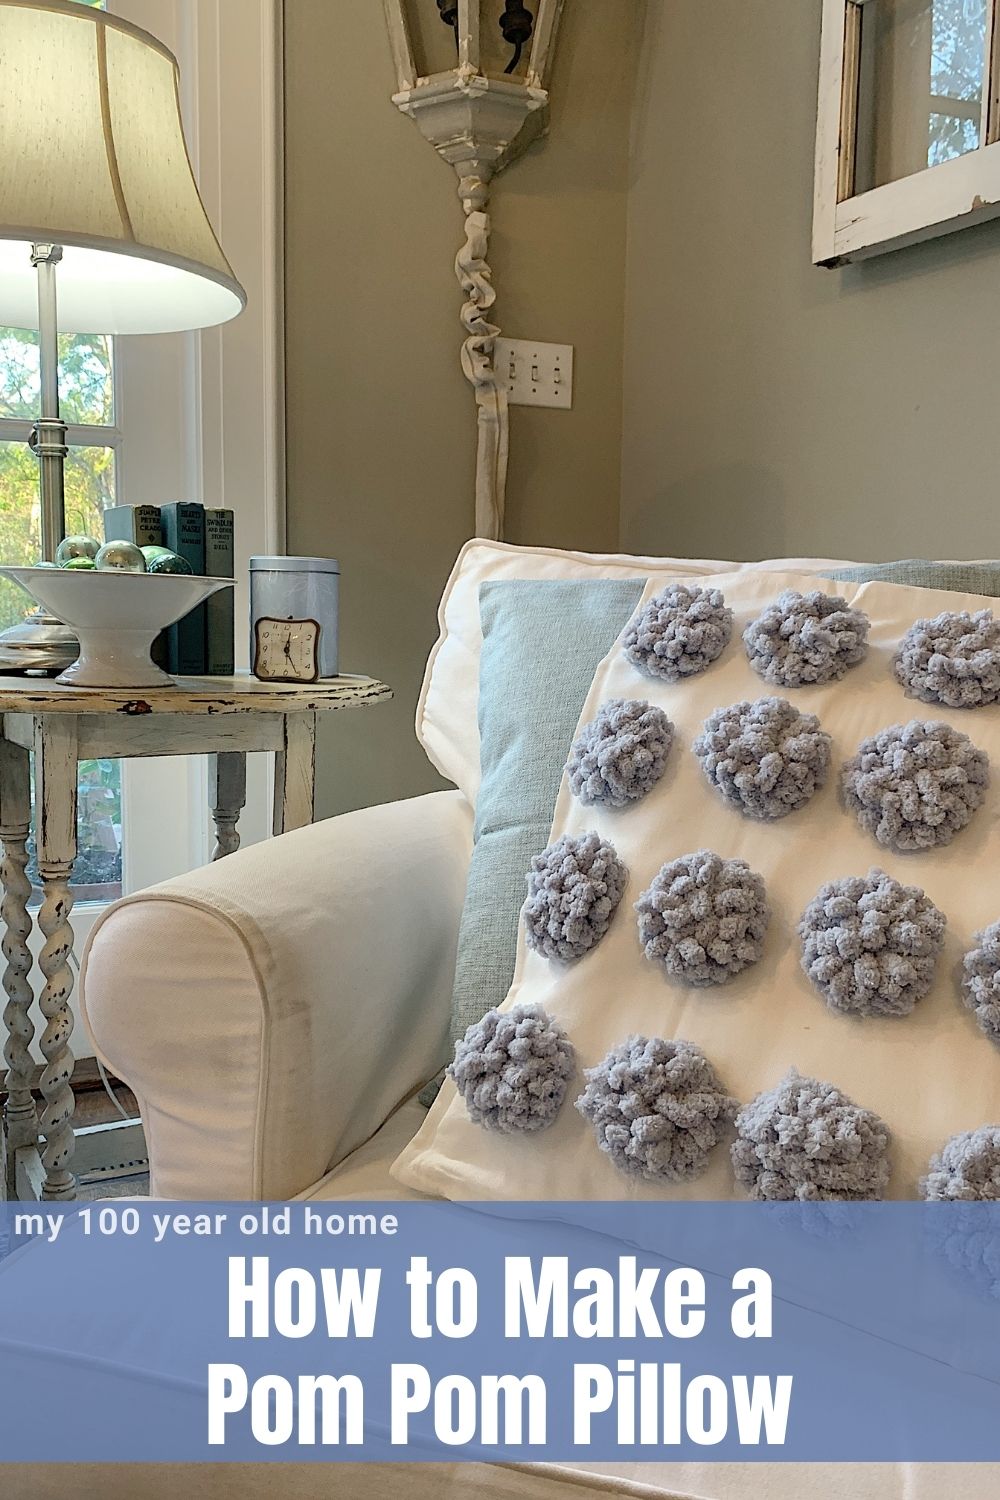 It's a warm and cozy time of the year and I have wanted to make a pom pom pillow for quite some time. I love this chenille yarn!